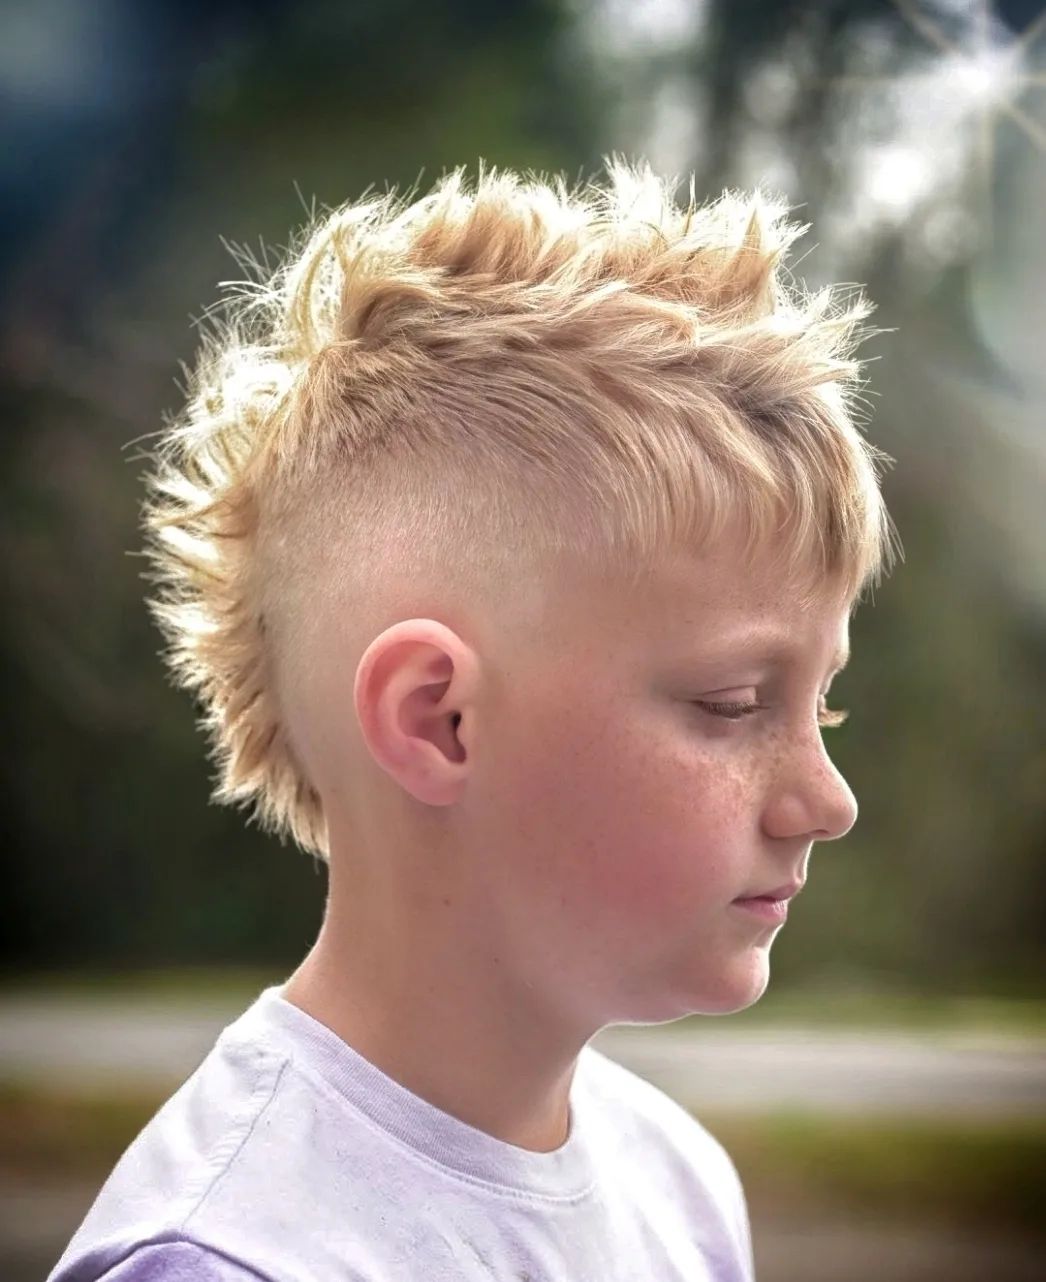 10 Coolest Curly Haircut Ideas for Boys